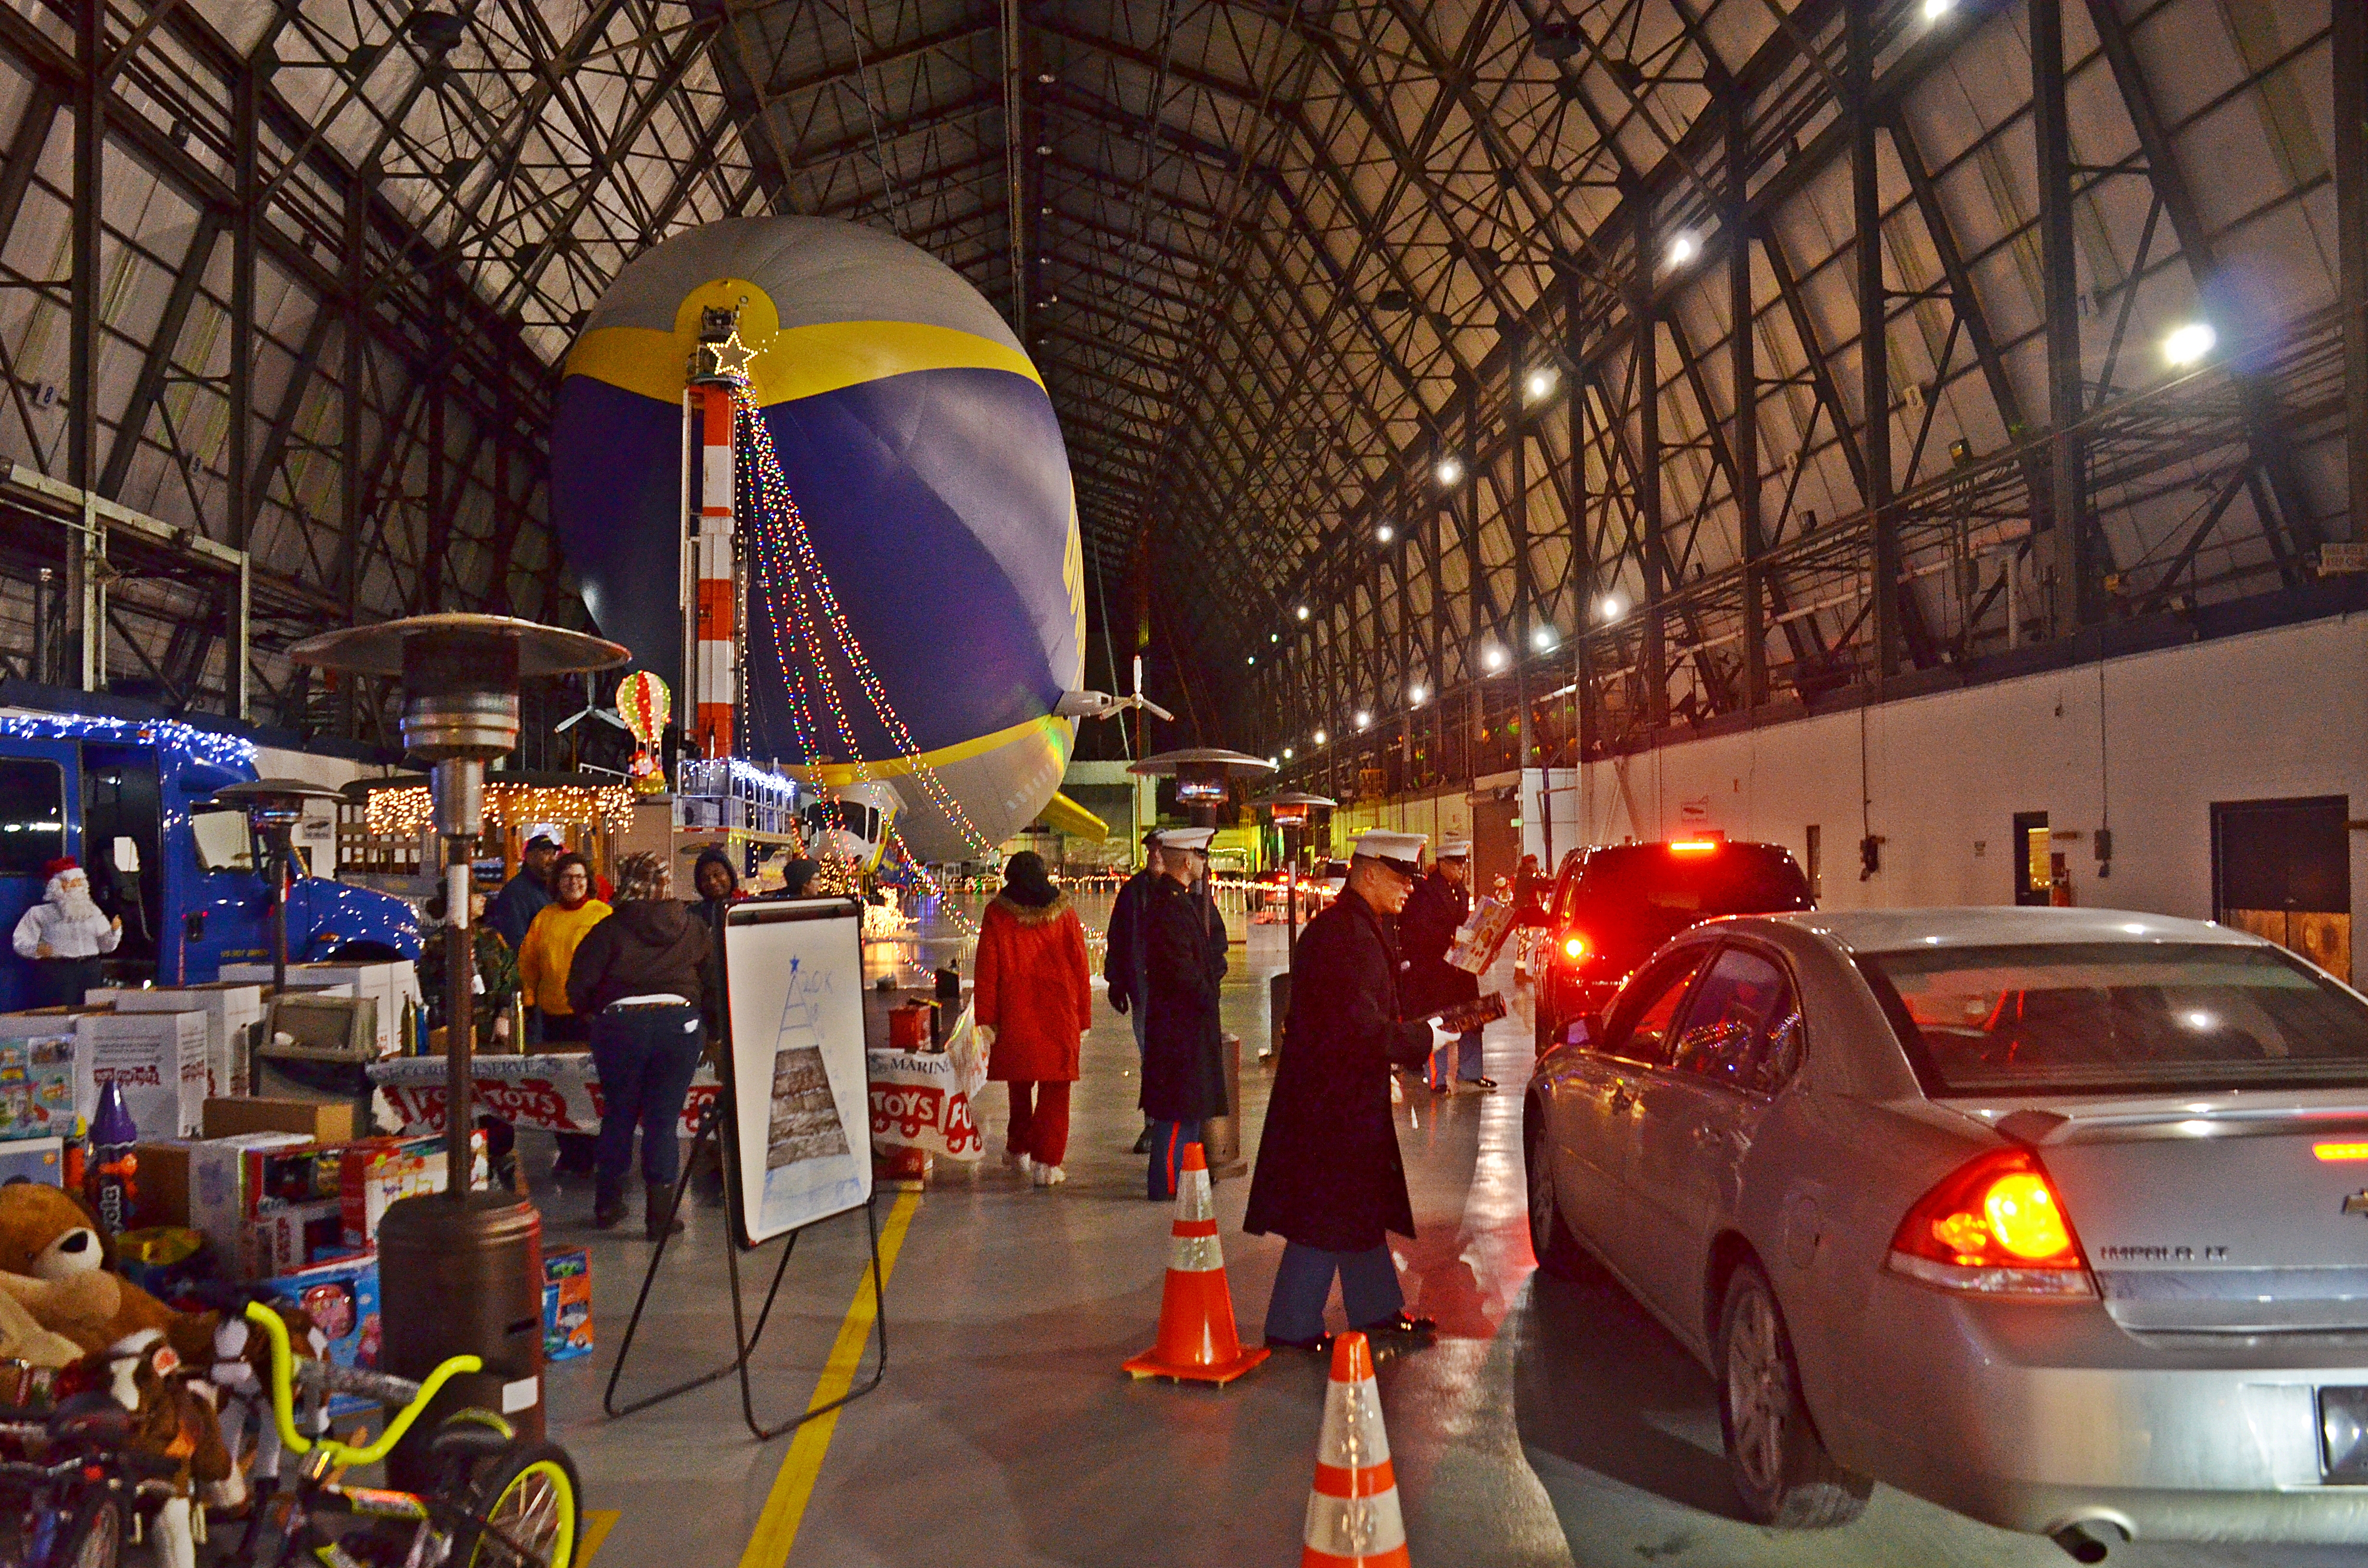 Collecting Toys 4 Tots at Goodyear blimp hanger